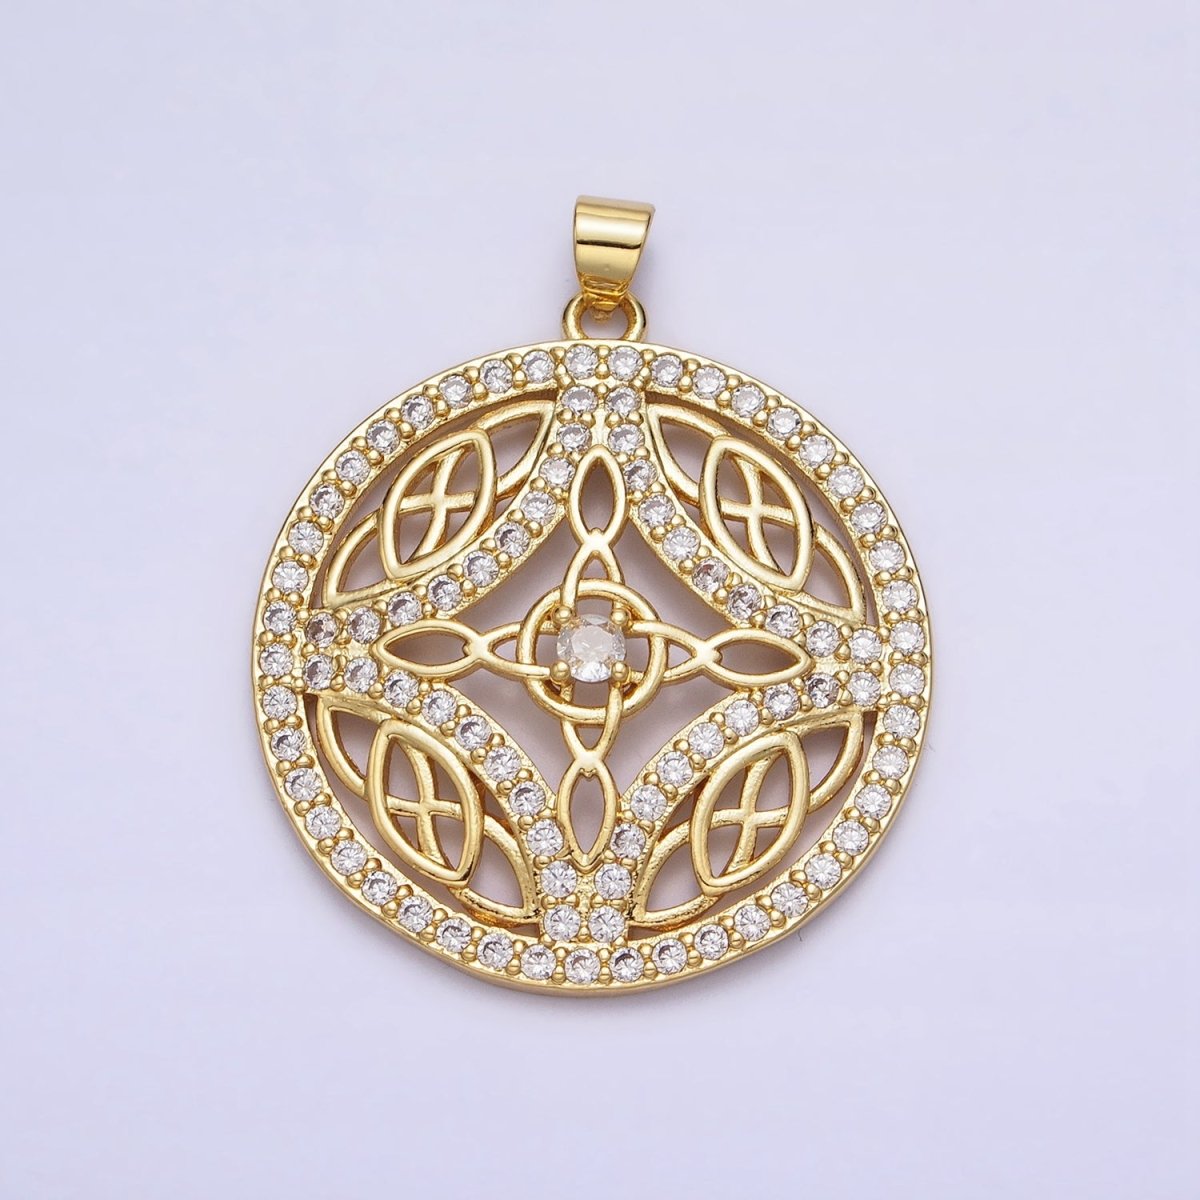 Statement Medallion Pendant Micro Pave Round Disc Charm in 24k Gold Filled AA256 - DLUXCA